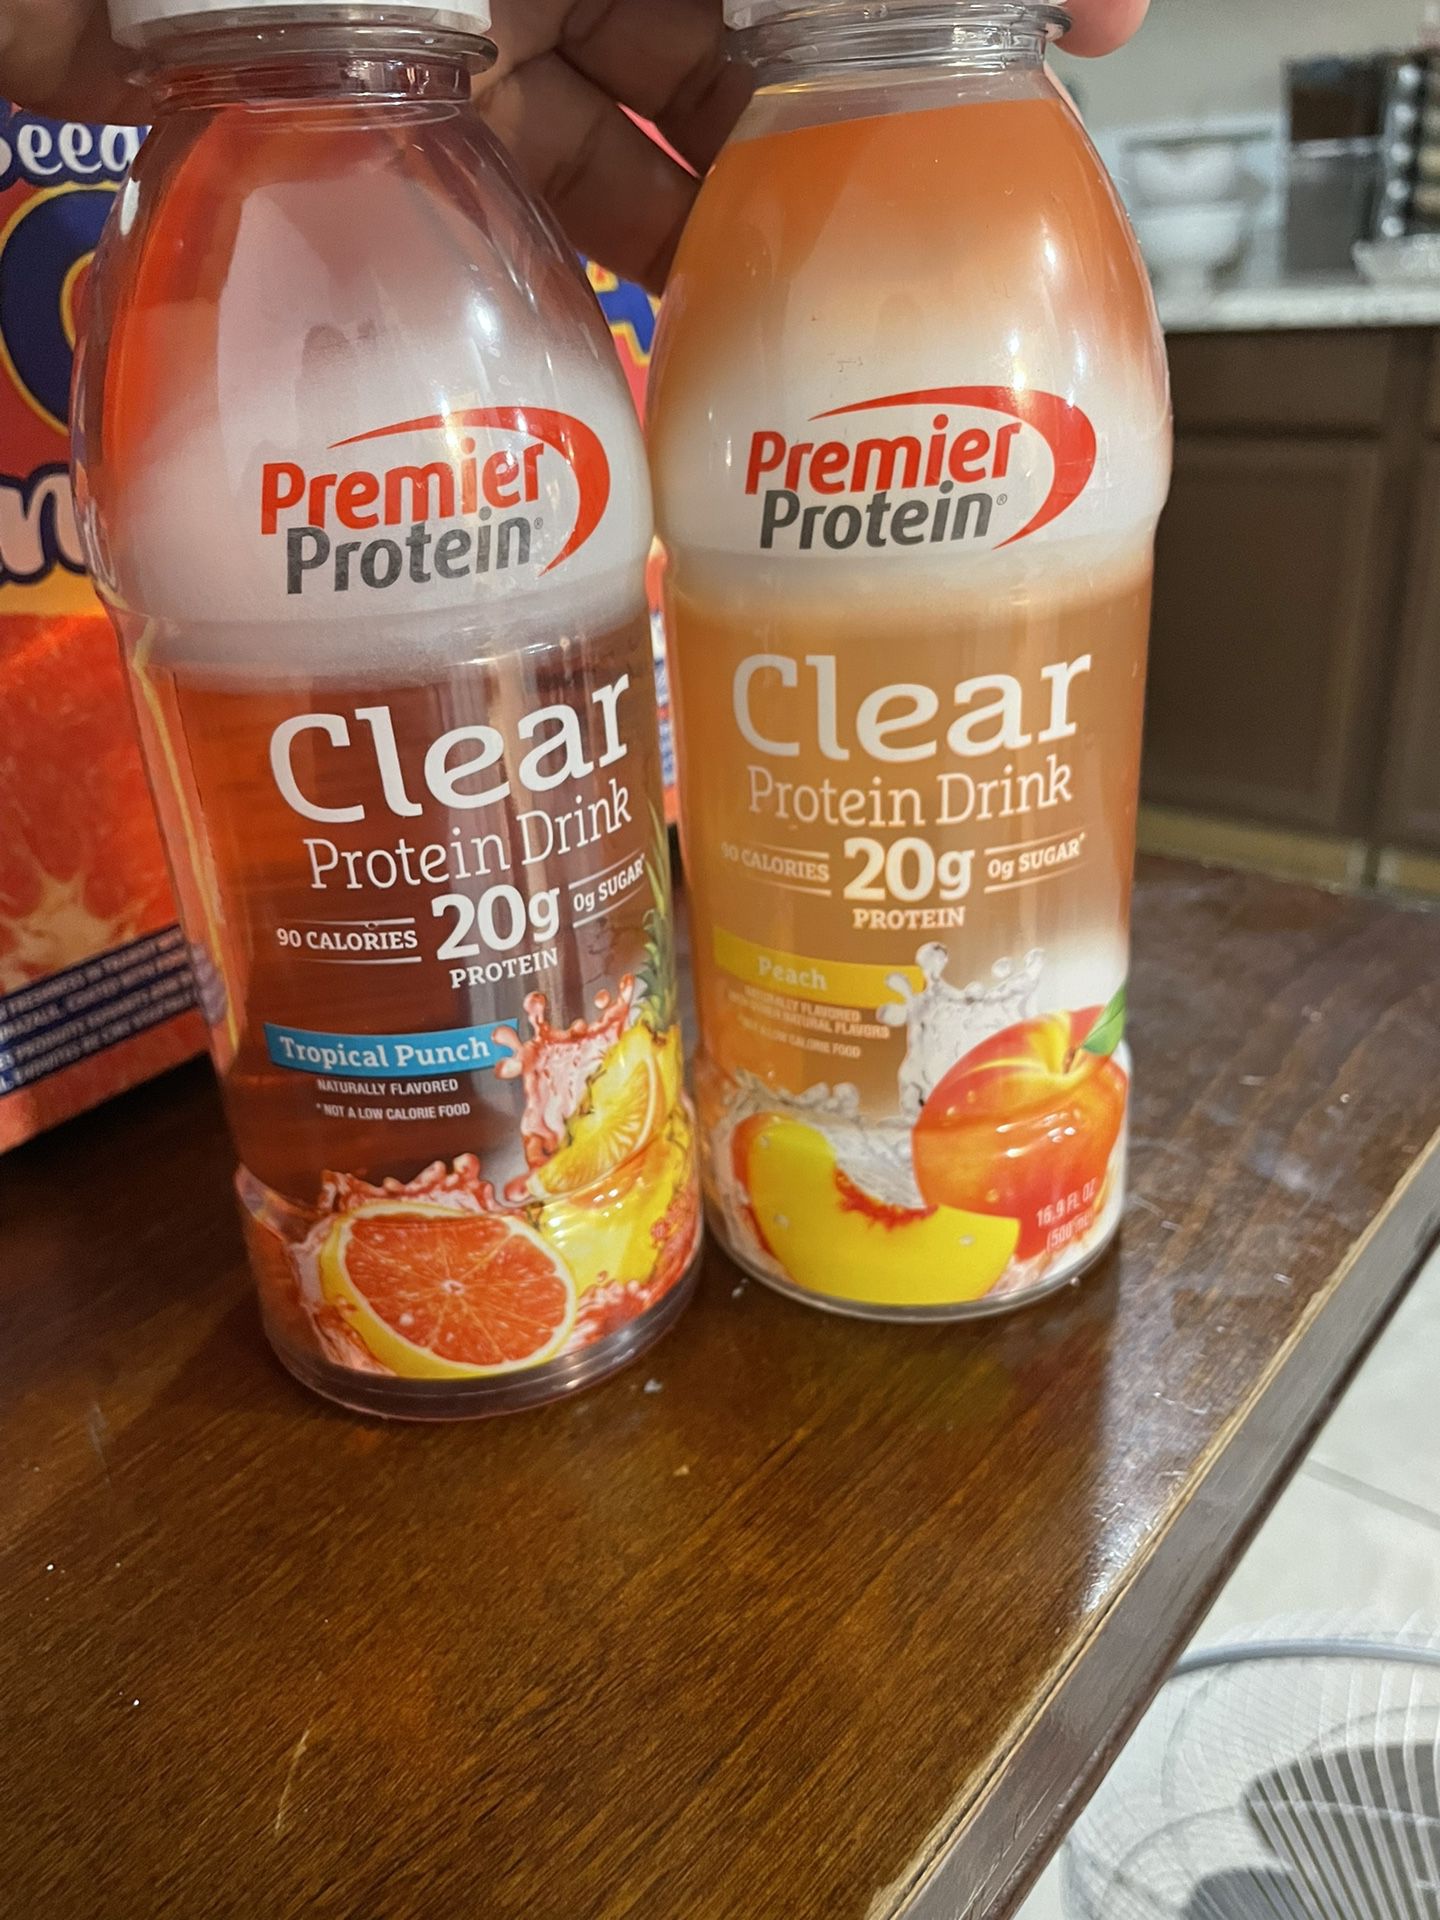 Premier Protein Clear Protein Drink Tropical Punch 16.9 fl oz